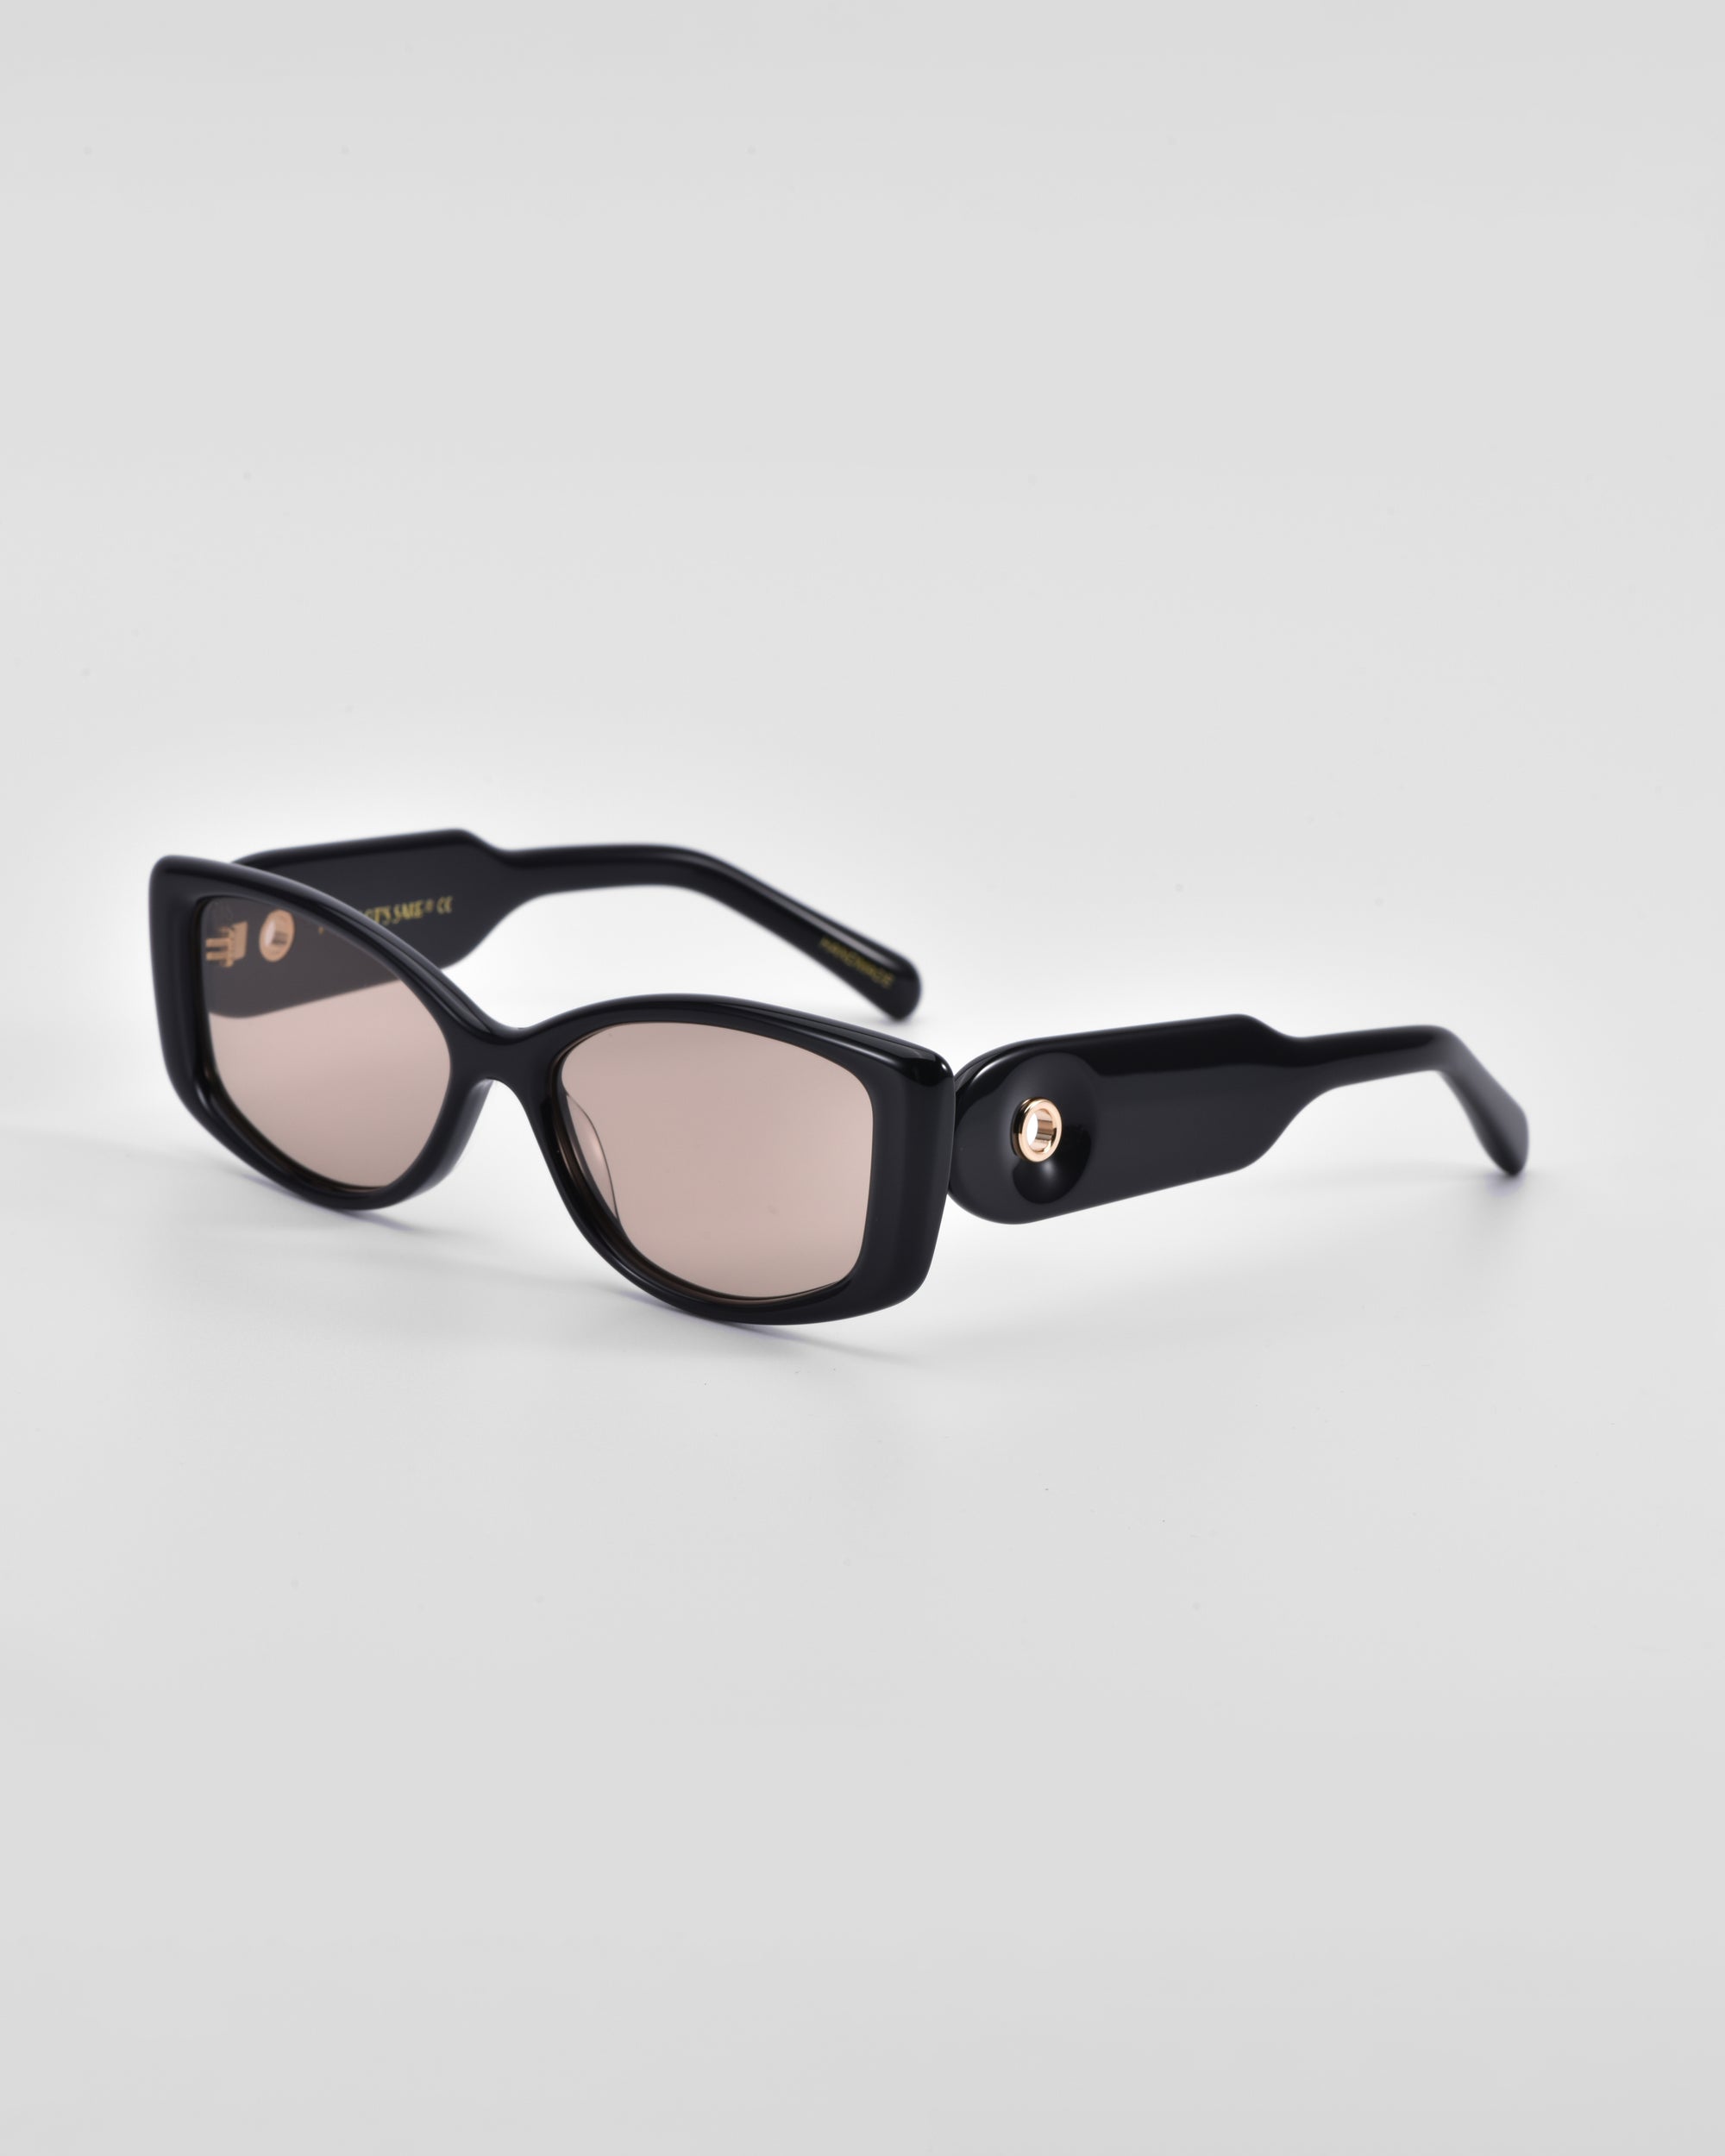 A pair of black rectangular Mene sunglasses with pink-tinted lenses from For Art&#39;s Sake® is displayed against a plain white background. The luxury frames have thick edges and feature a small, round embellishment near the hinges on each side.